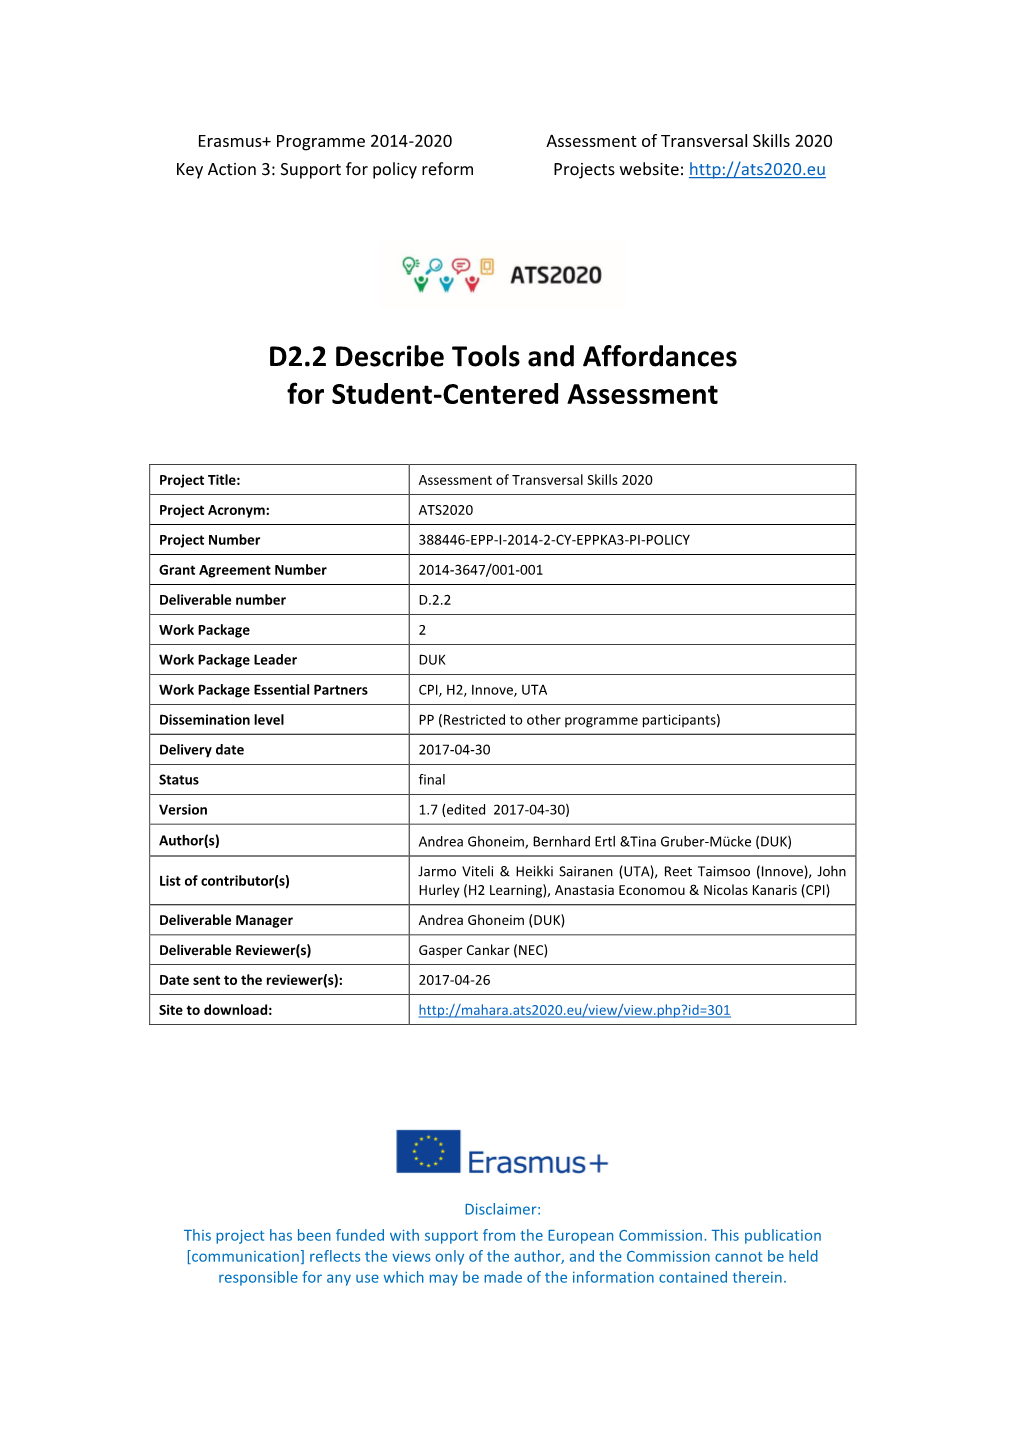 D2.2 Describe Tools and Affordances for Student-Centered Assessment